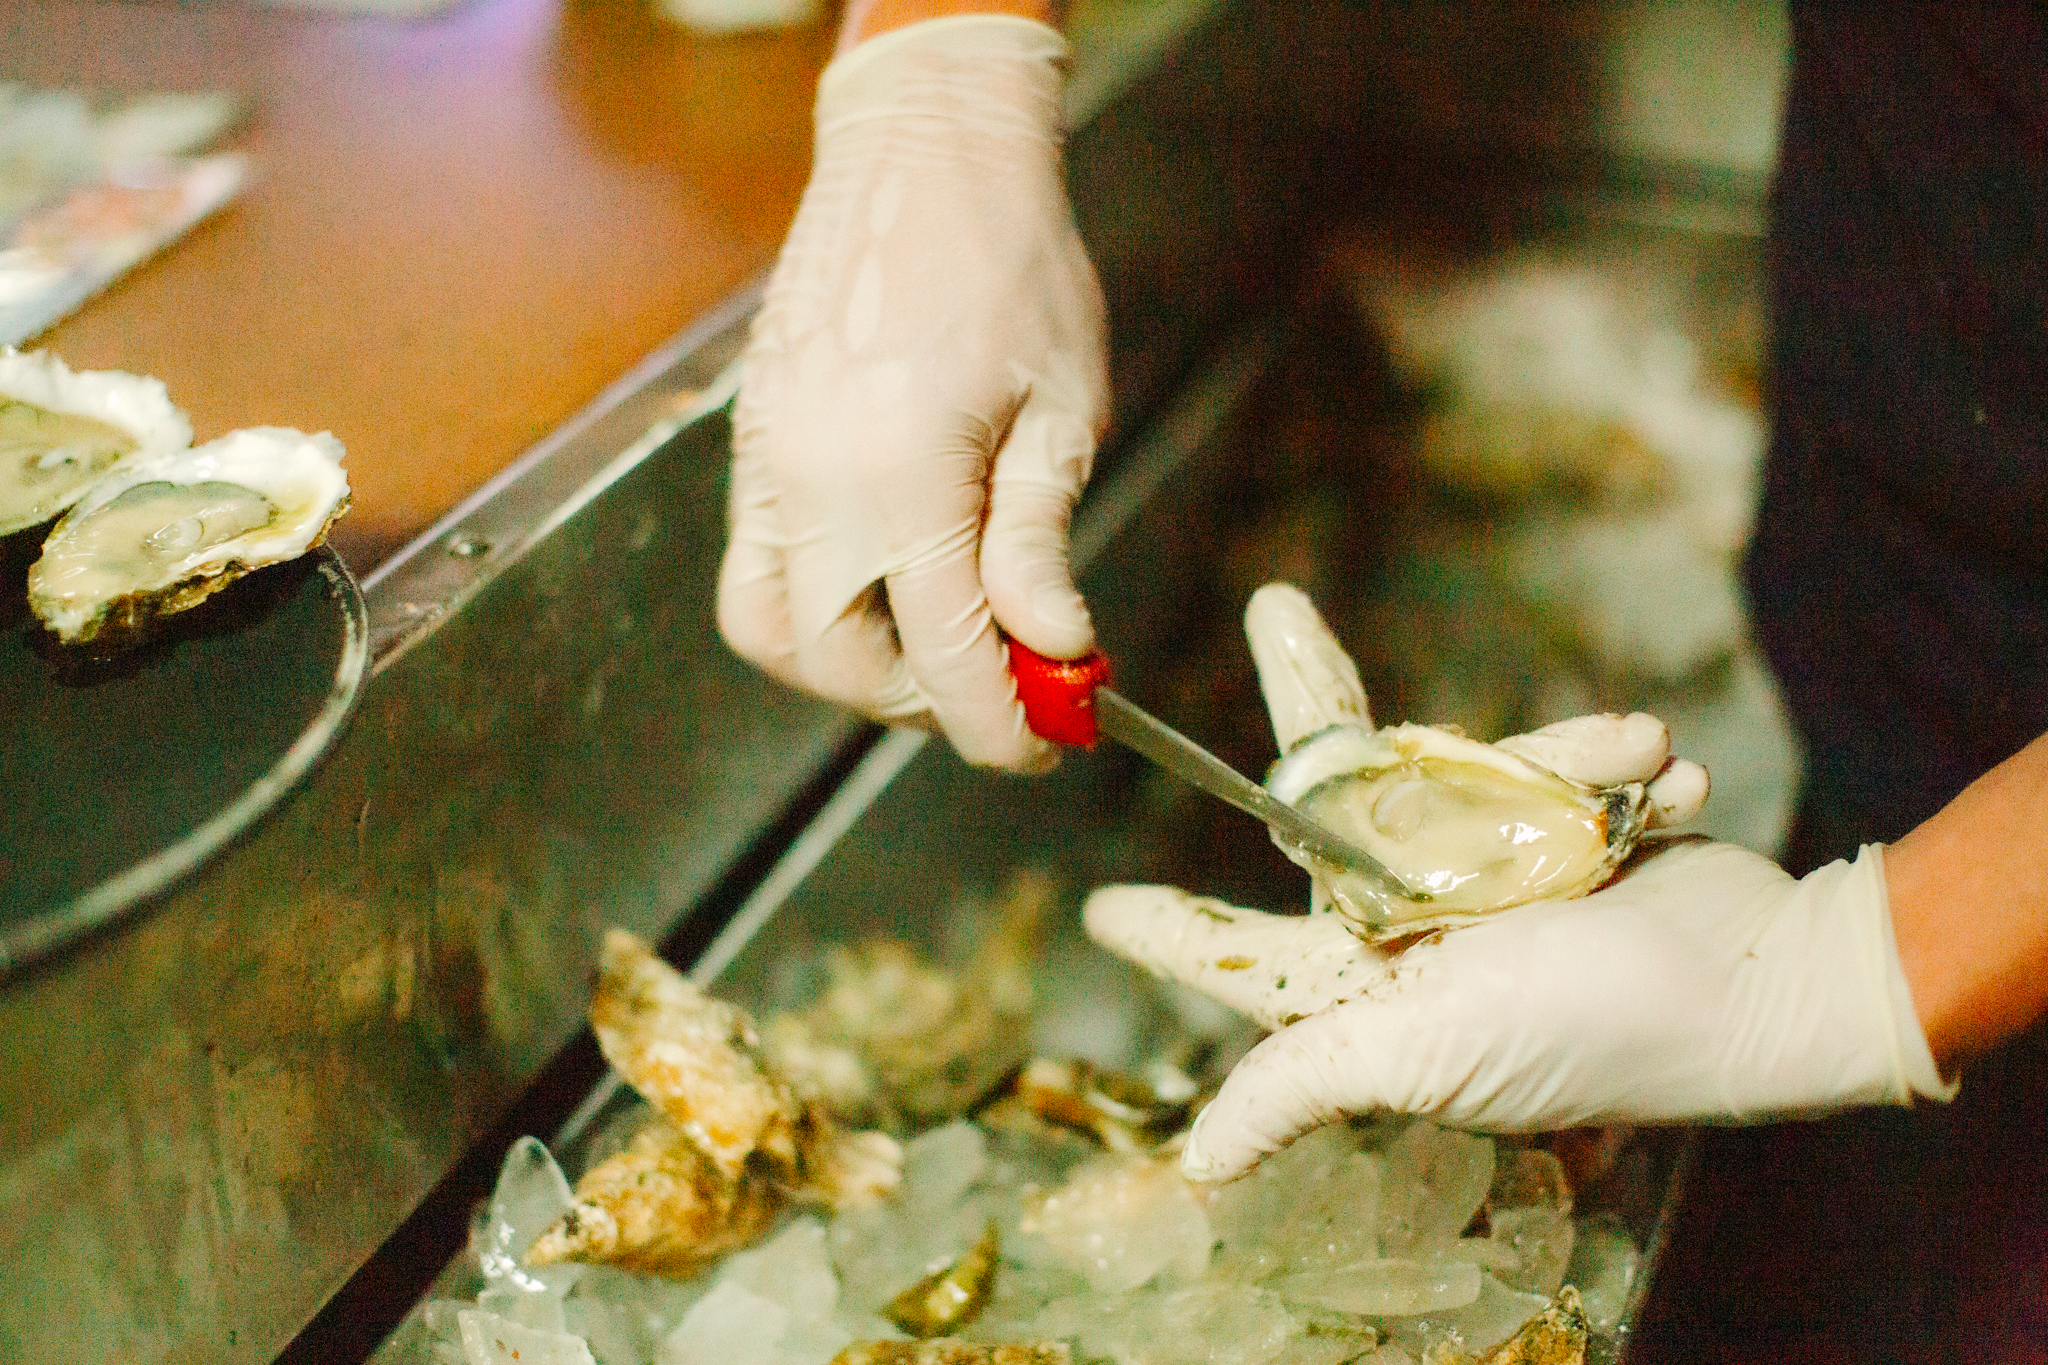 shucking oysters | how to shuck an oyster